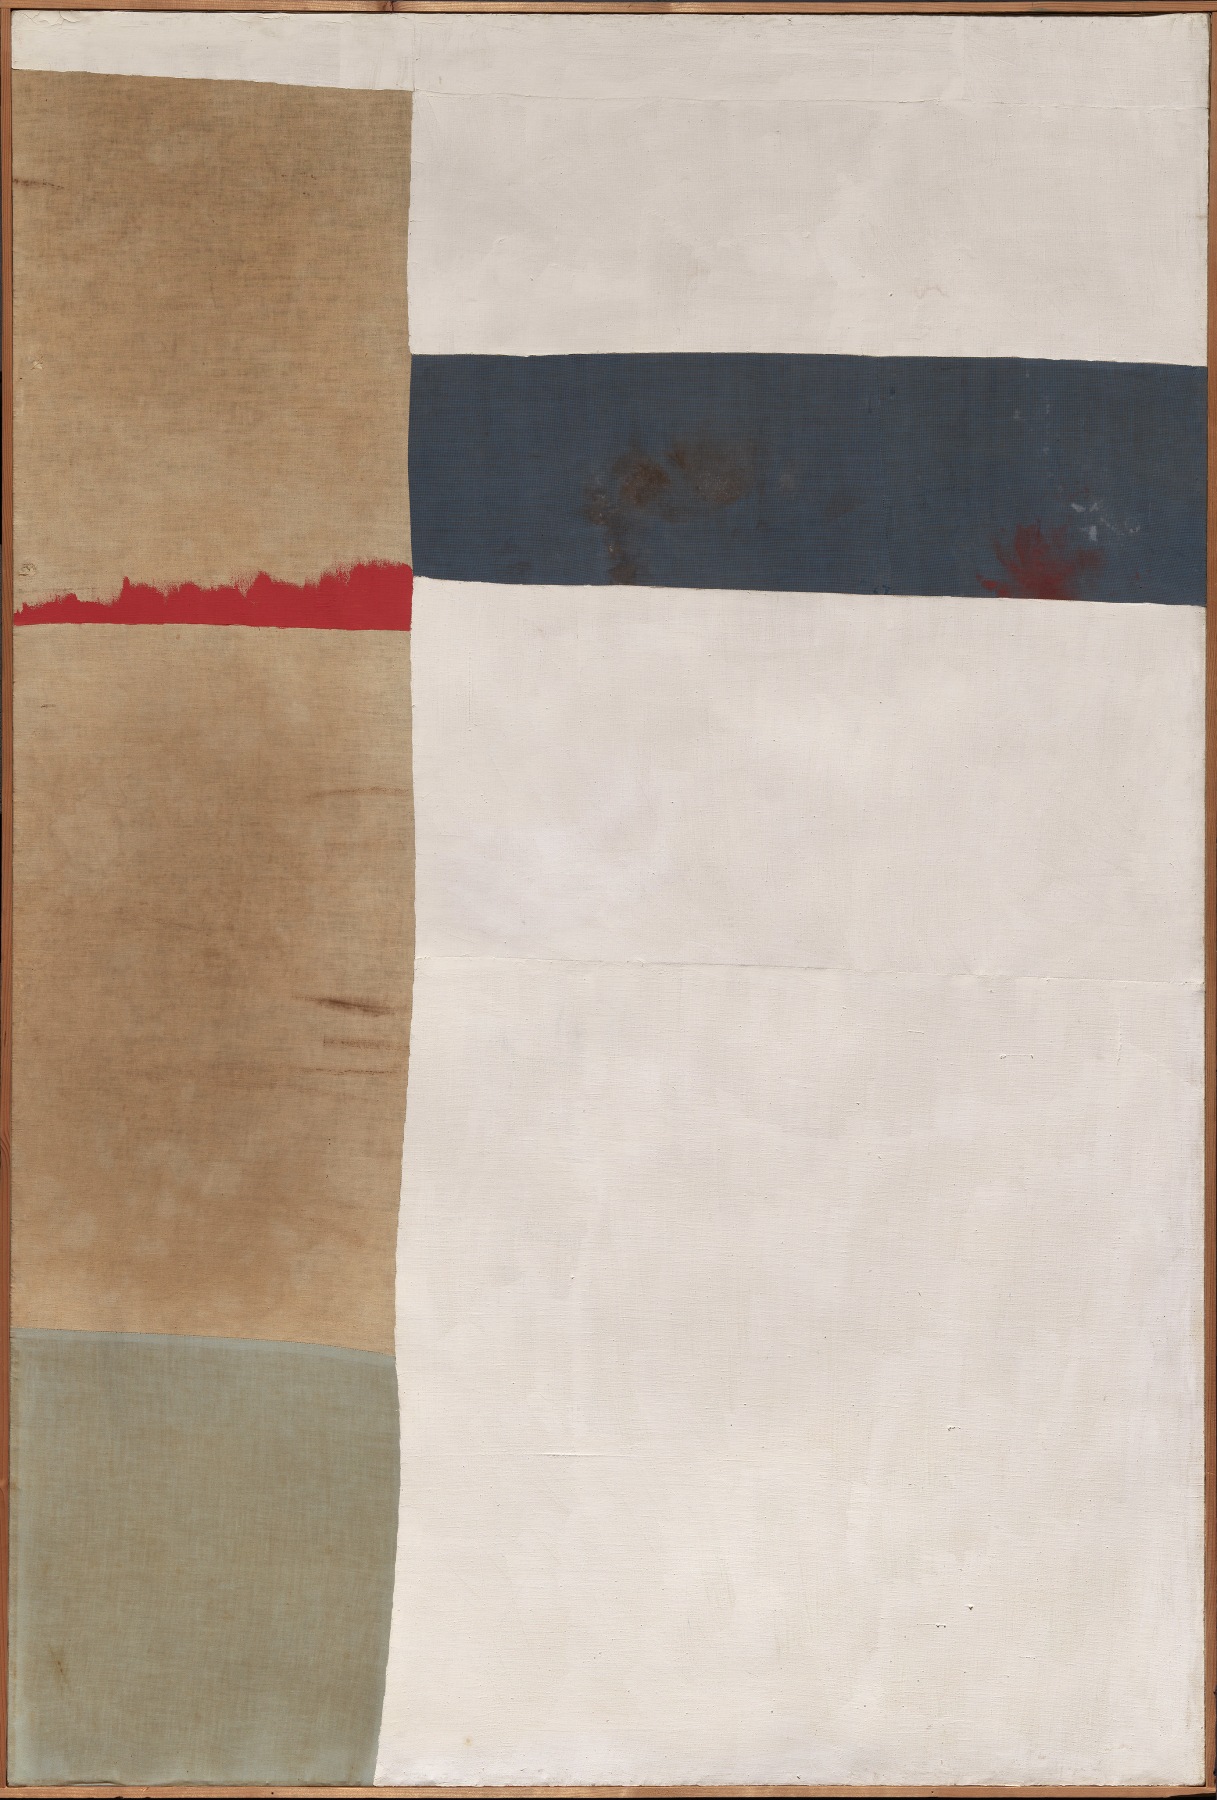 Nuvolo (Giorgio Ascani). Composition. 1957. Oil and fabric on canvas, 171.5 by 116 cm (67&frac12; by 45⅝ in.). Museum of Fine Arts, Boston. Gift of Mrs. Peggy Guggenheim.